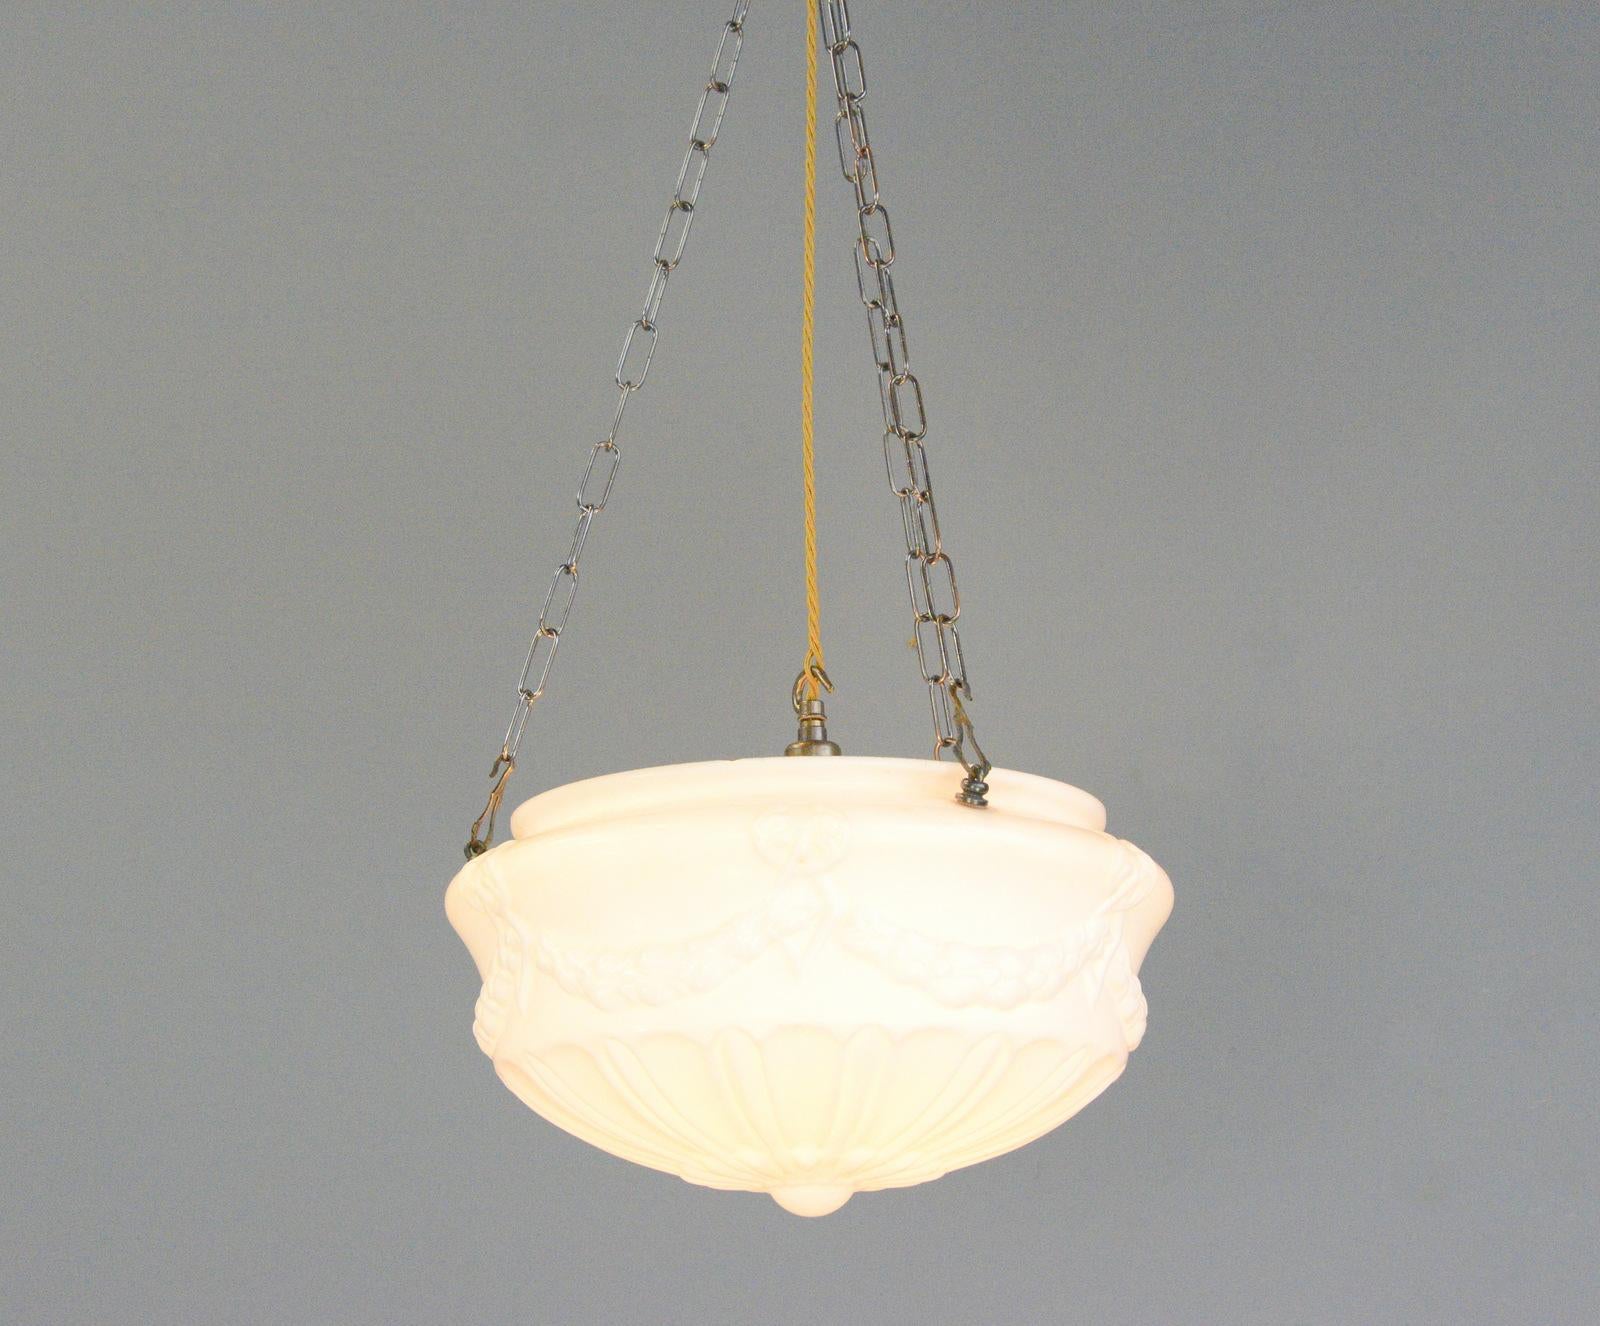 Early 20th century Opaline Hallway Light circa 1910

- Molded opaline glass diffuser
- Copper chain and bulb holder
- Original matching ceiling rose
- Takes E27 fitting bulbs
- English ~ 1910
- 37cm wide x 19cm tall 
- Up to 150cm drop from